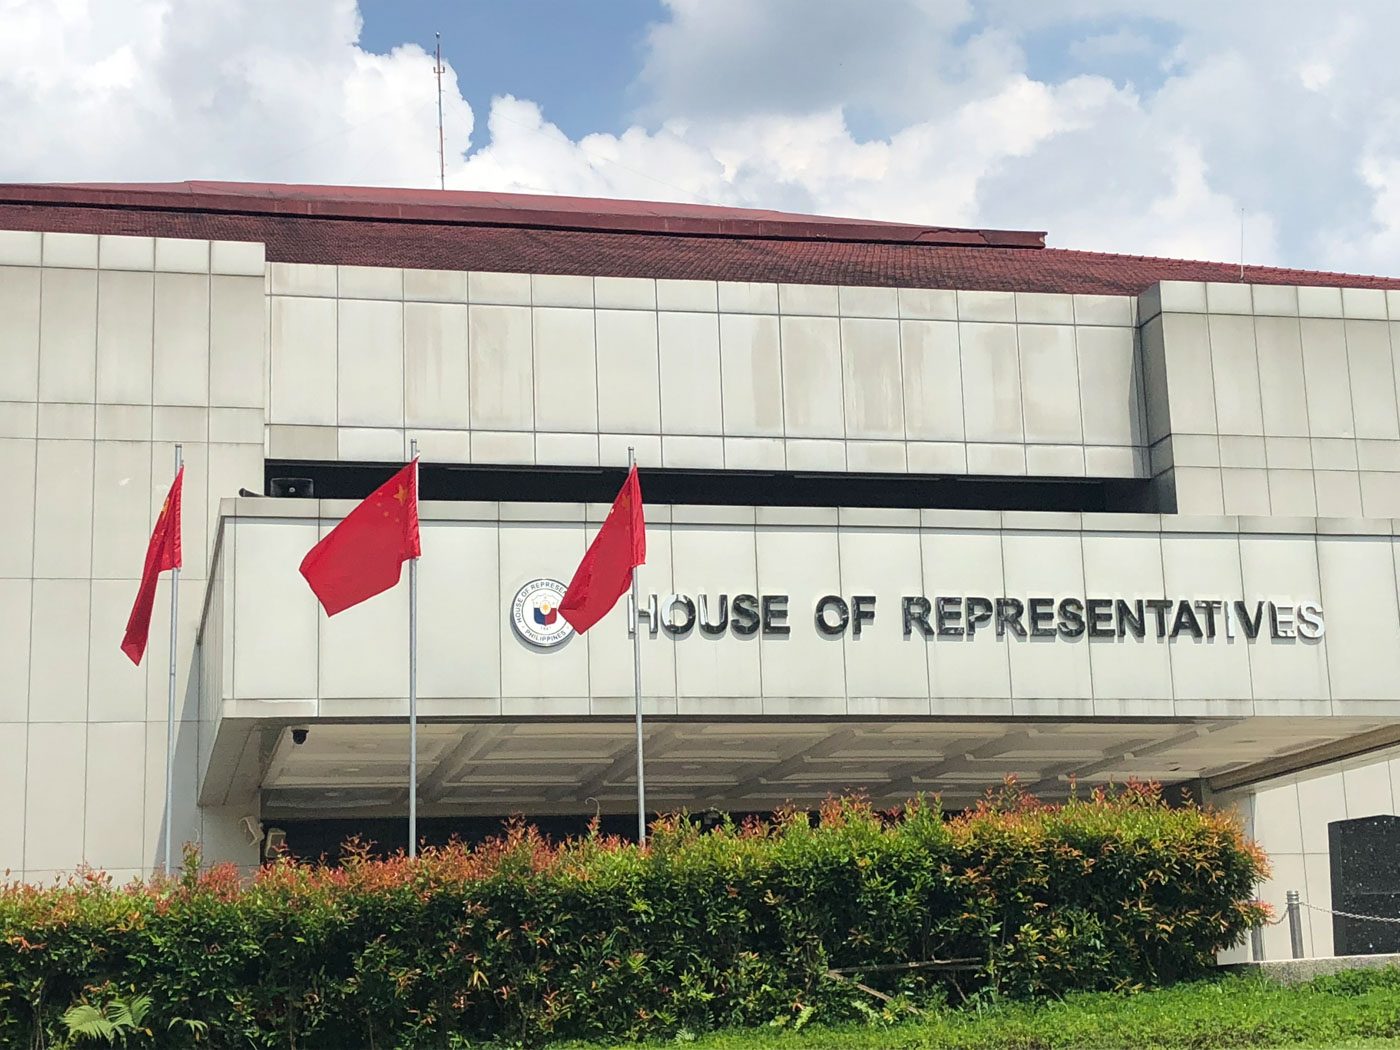 LOOK: Chinese flags raised at Batasan to welcome Beijing officials